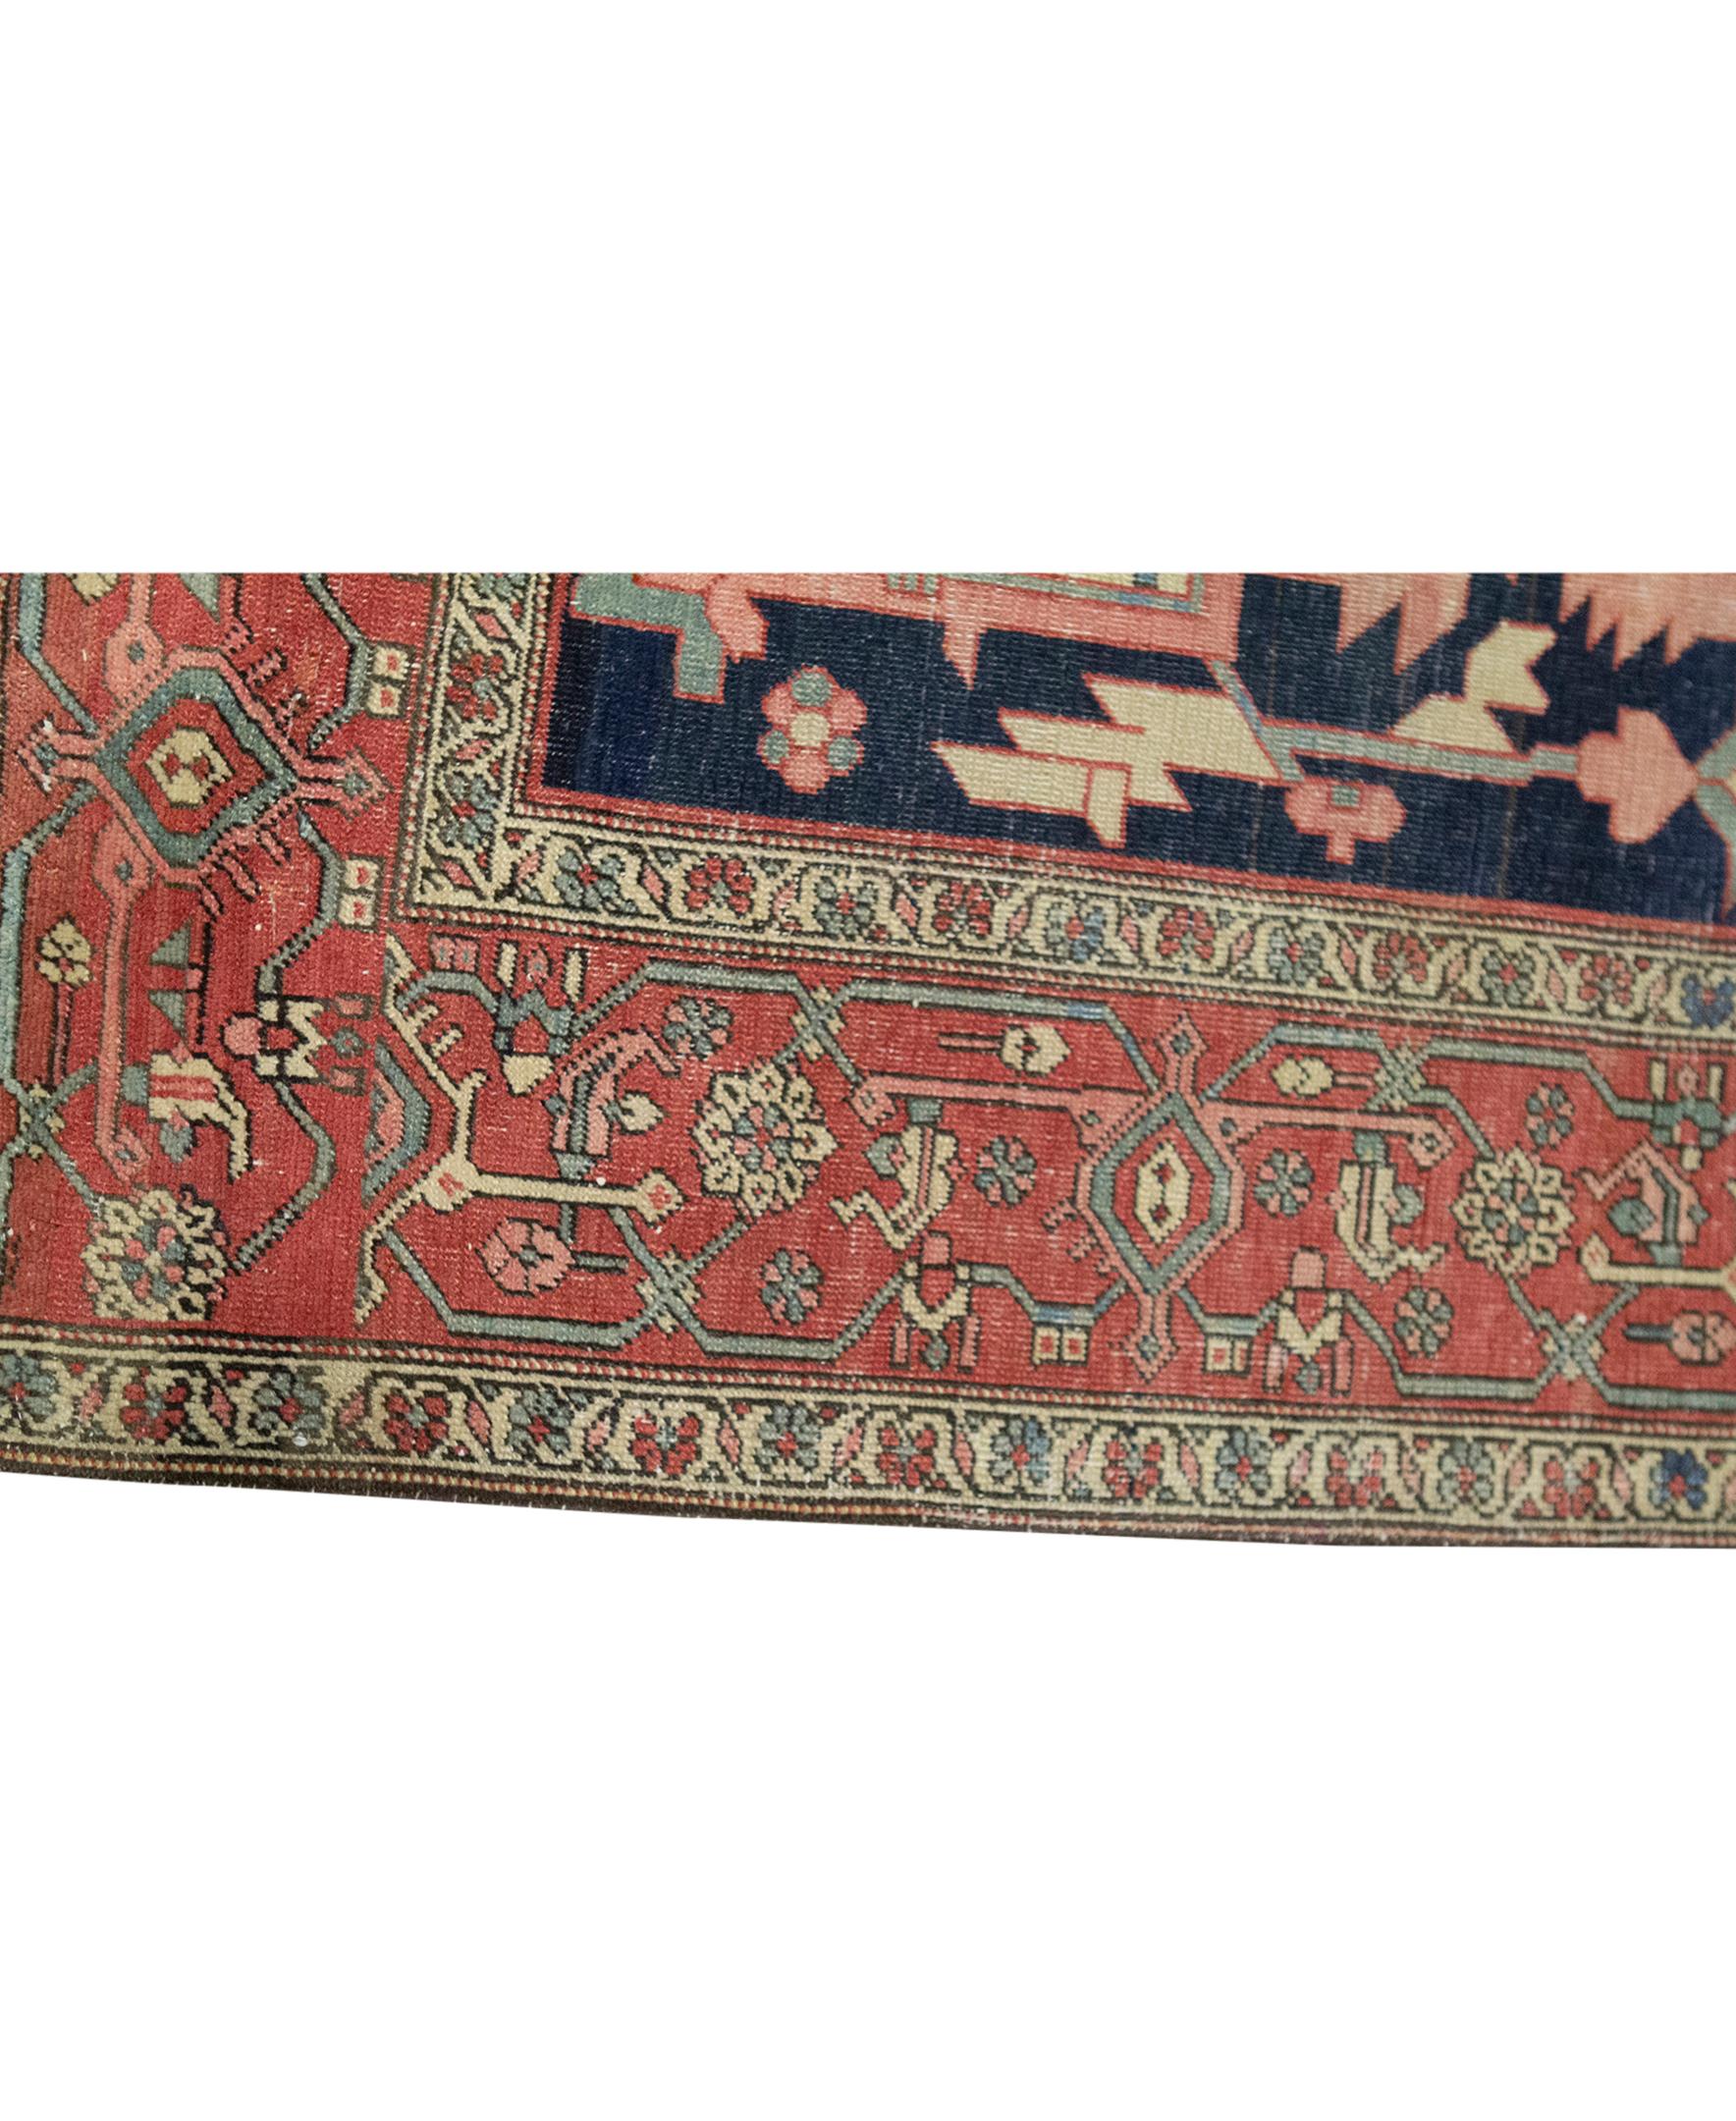   Antique Persian Fine Traditional Handwoven Luxury Wool Red Rug. Size: 9'-8